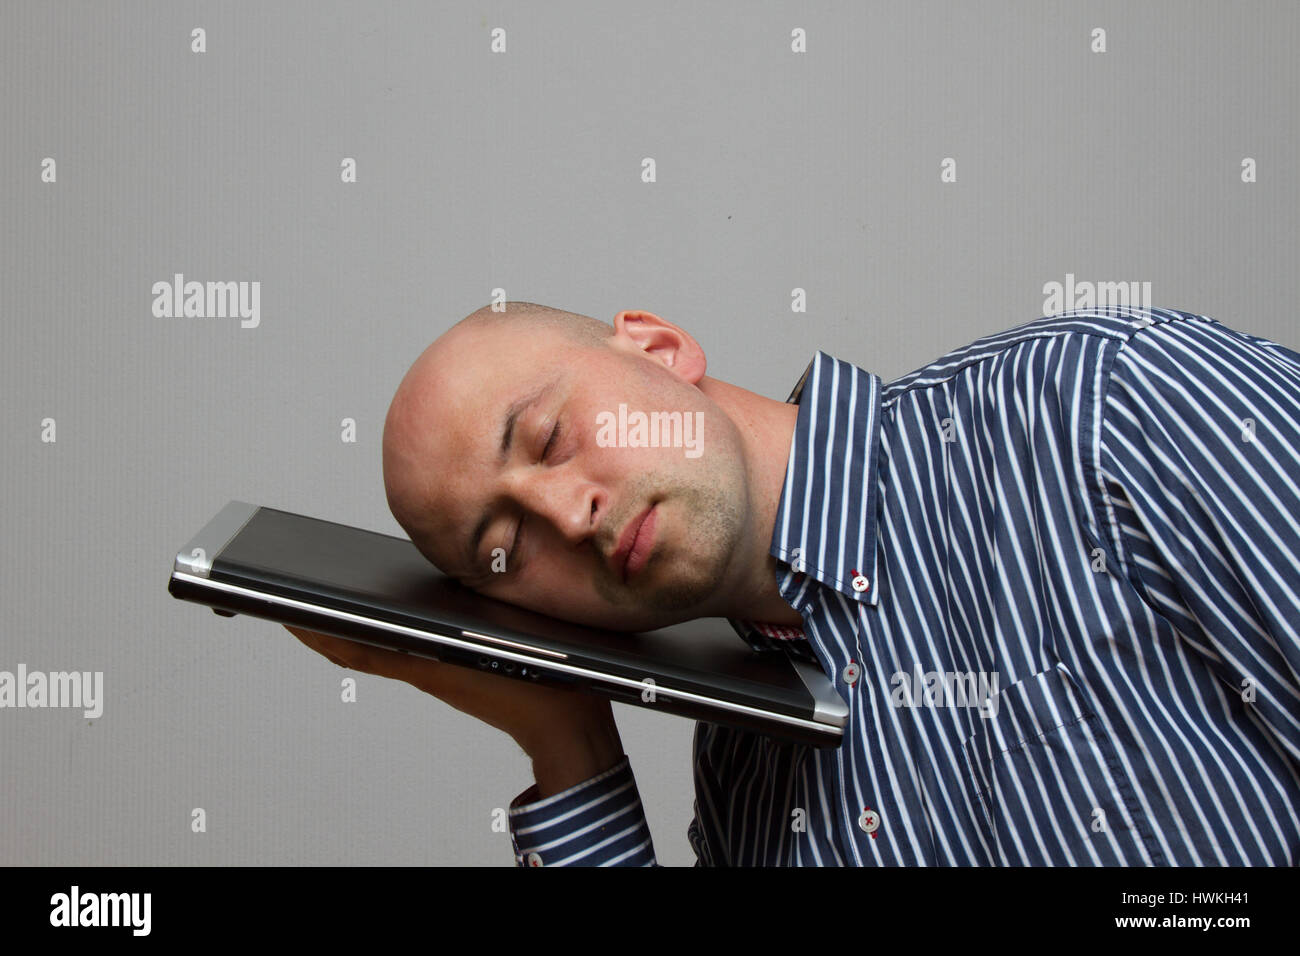 Businessman tiring and sleeping on his laptop in outdoor scene - overworked concept Stock Photo